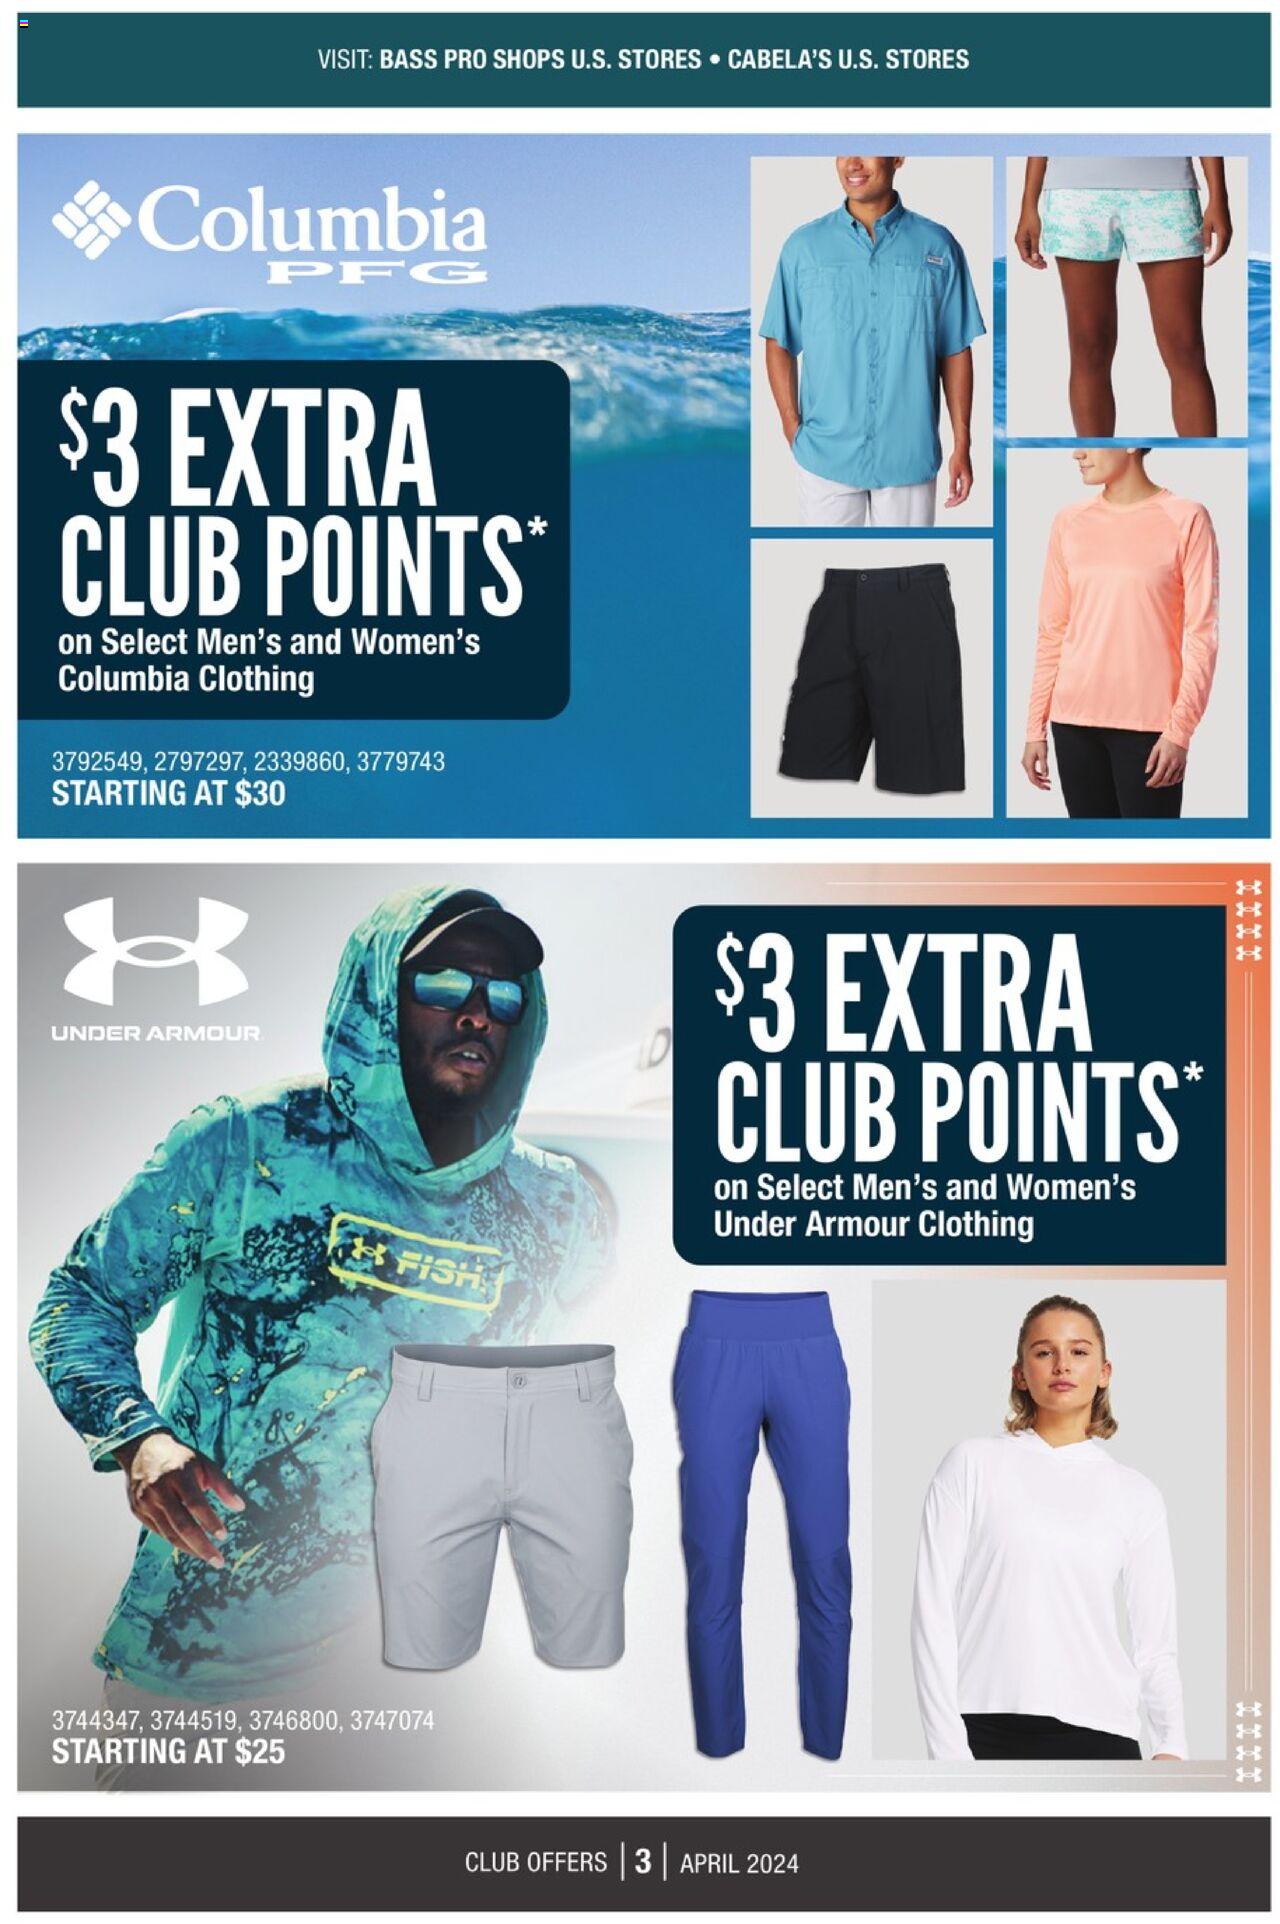 Bass Pro Shops - Members Only Exclusive Club Offers - Page 3